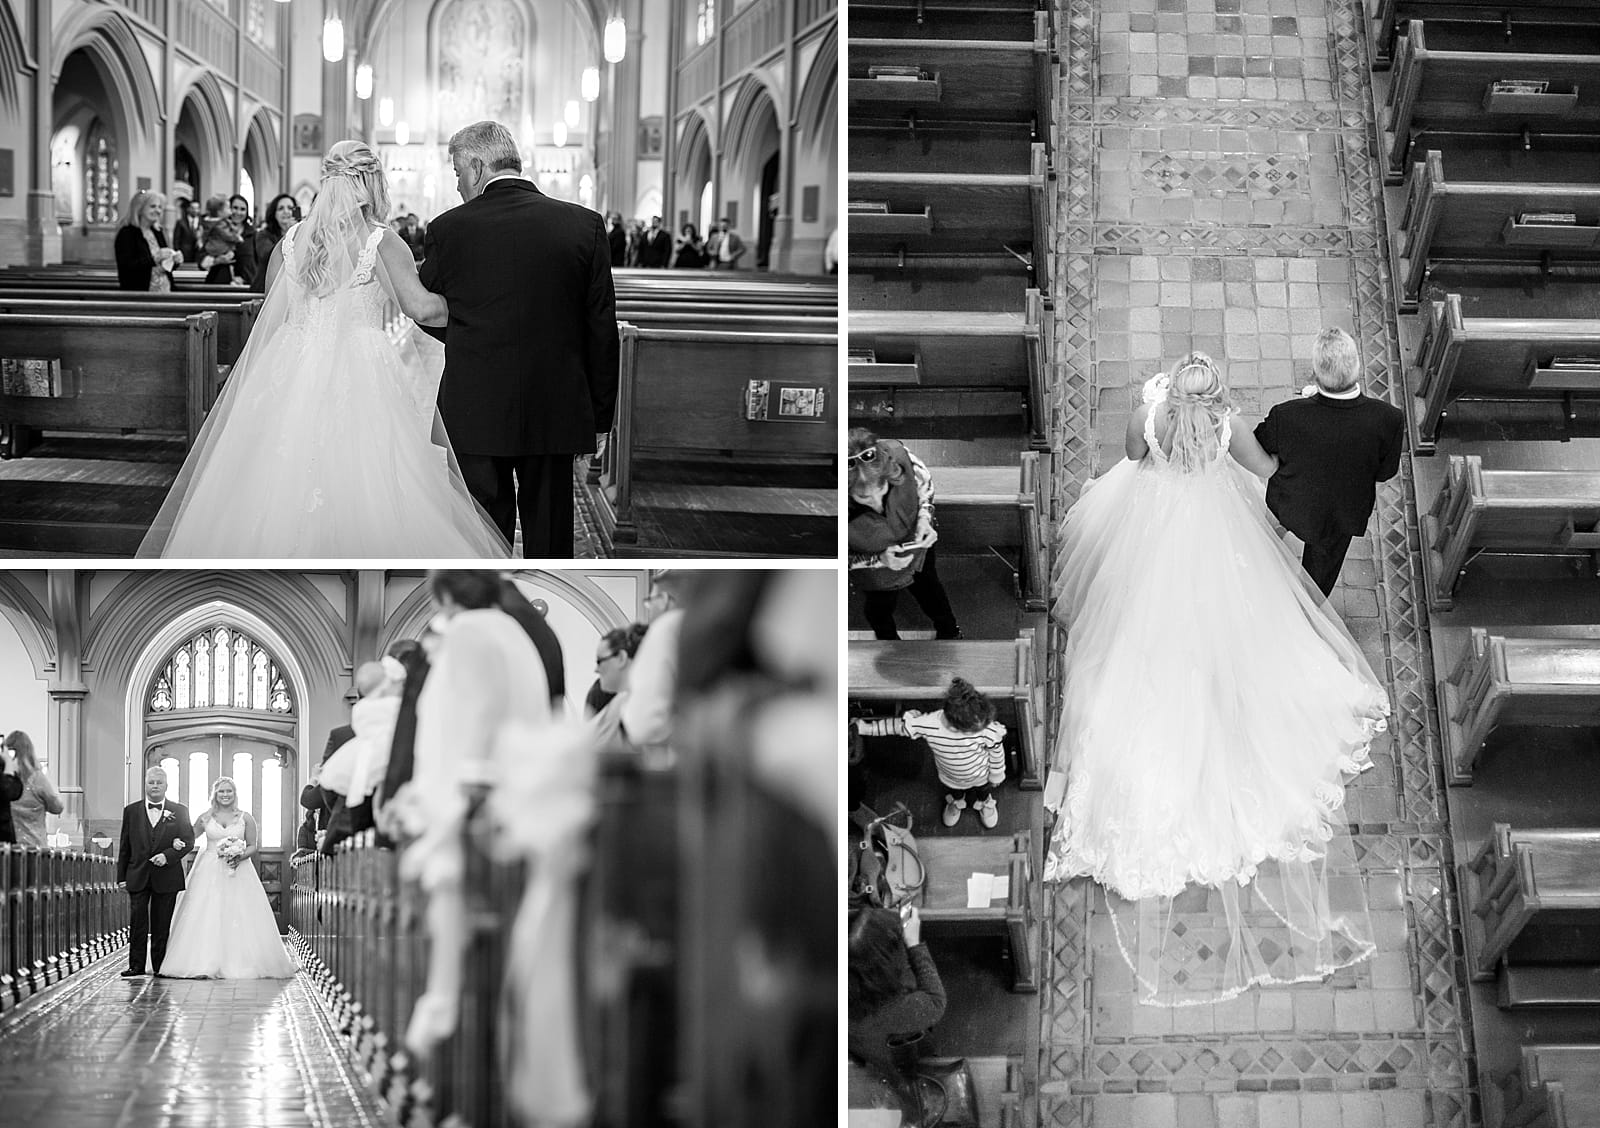 Bride & her father walking down the aisle during a catholic wedding mass at St Matthew's Church in Conshohocken.